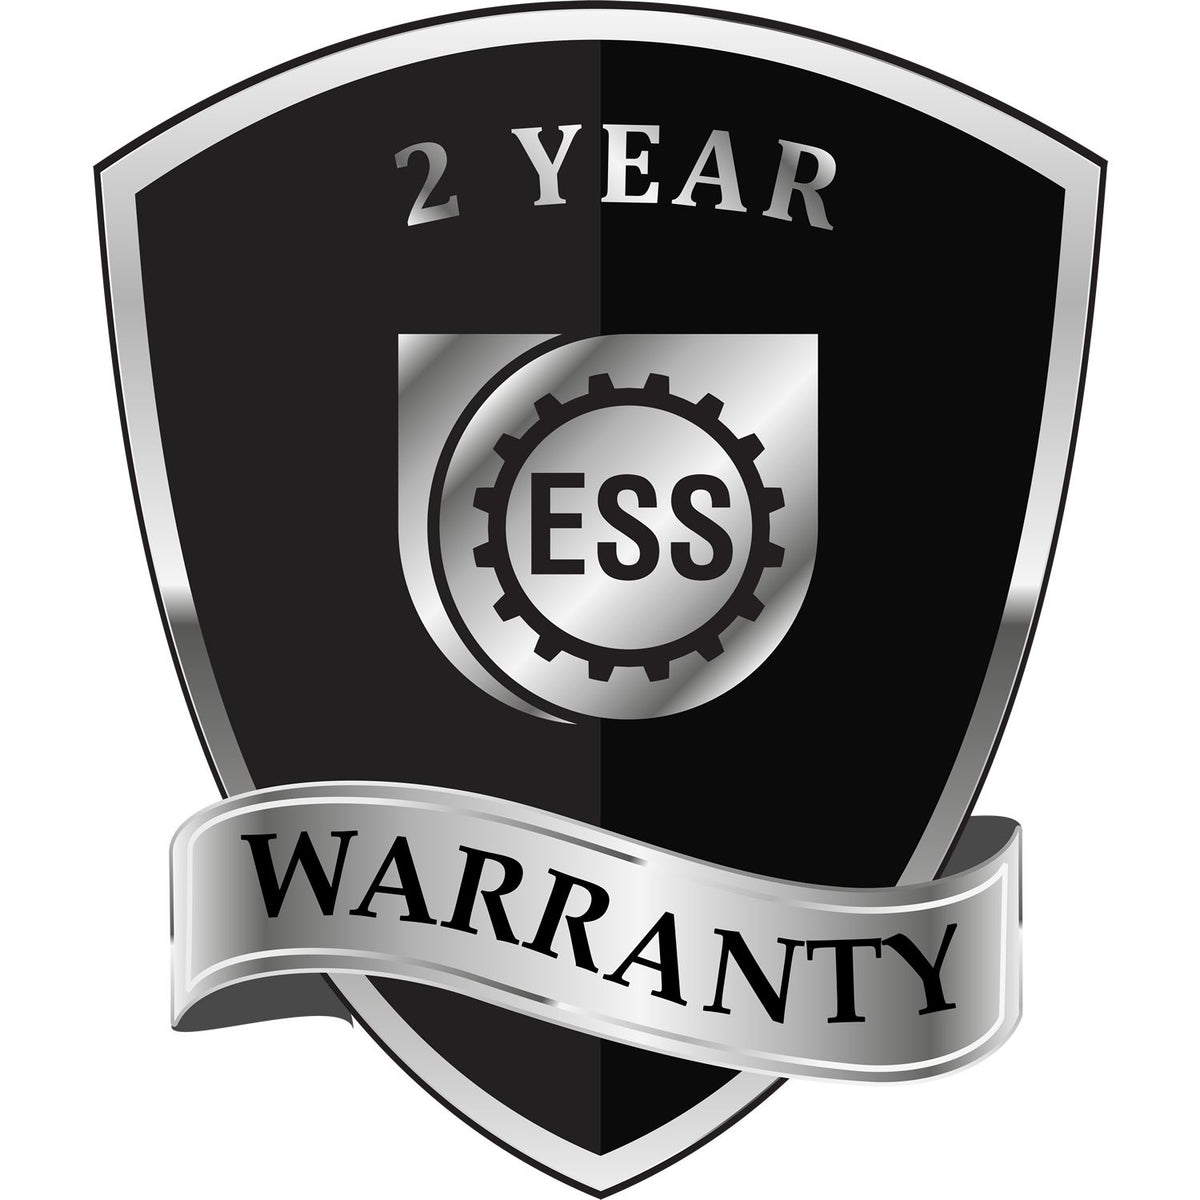 A black and silver badge or emblem showing warranty information for the Gift Ohio Engineer Seal